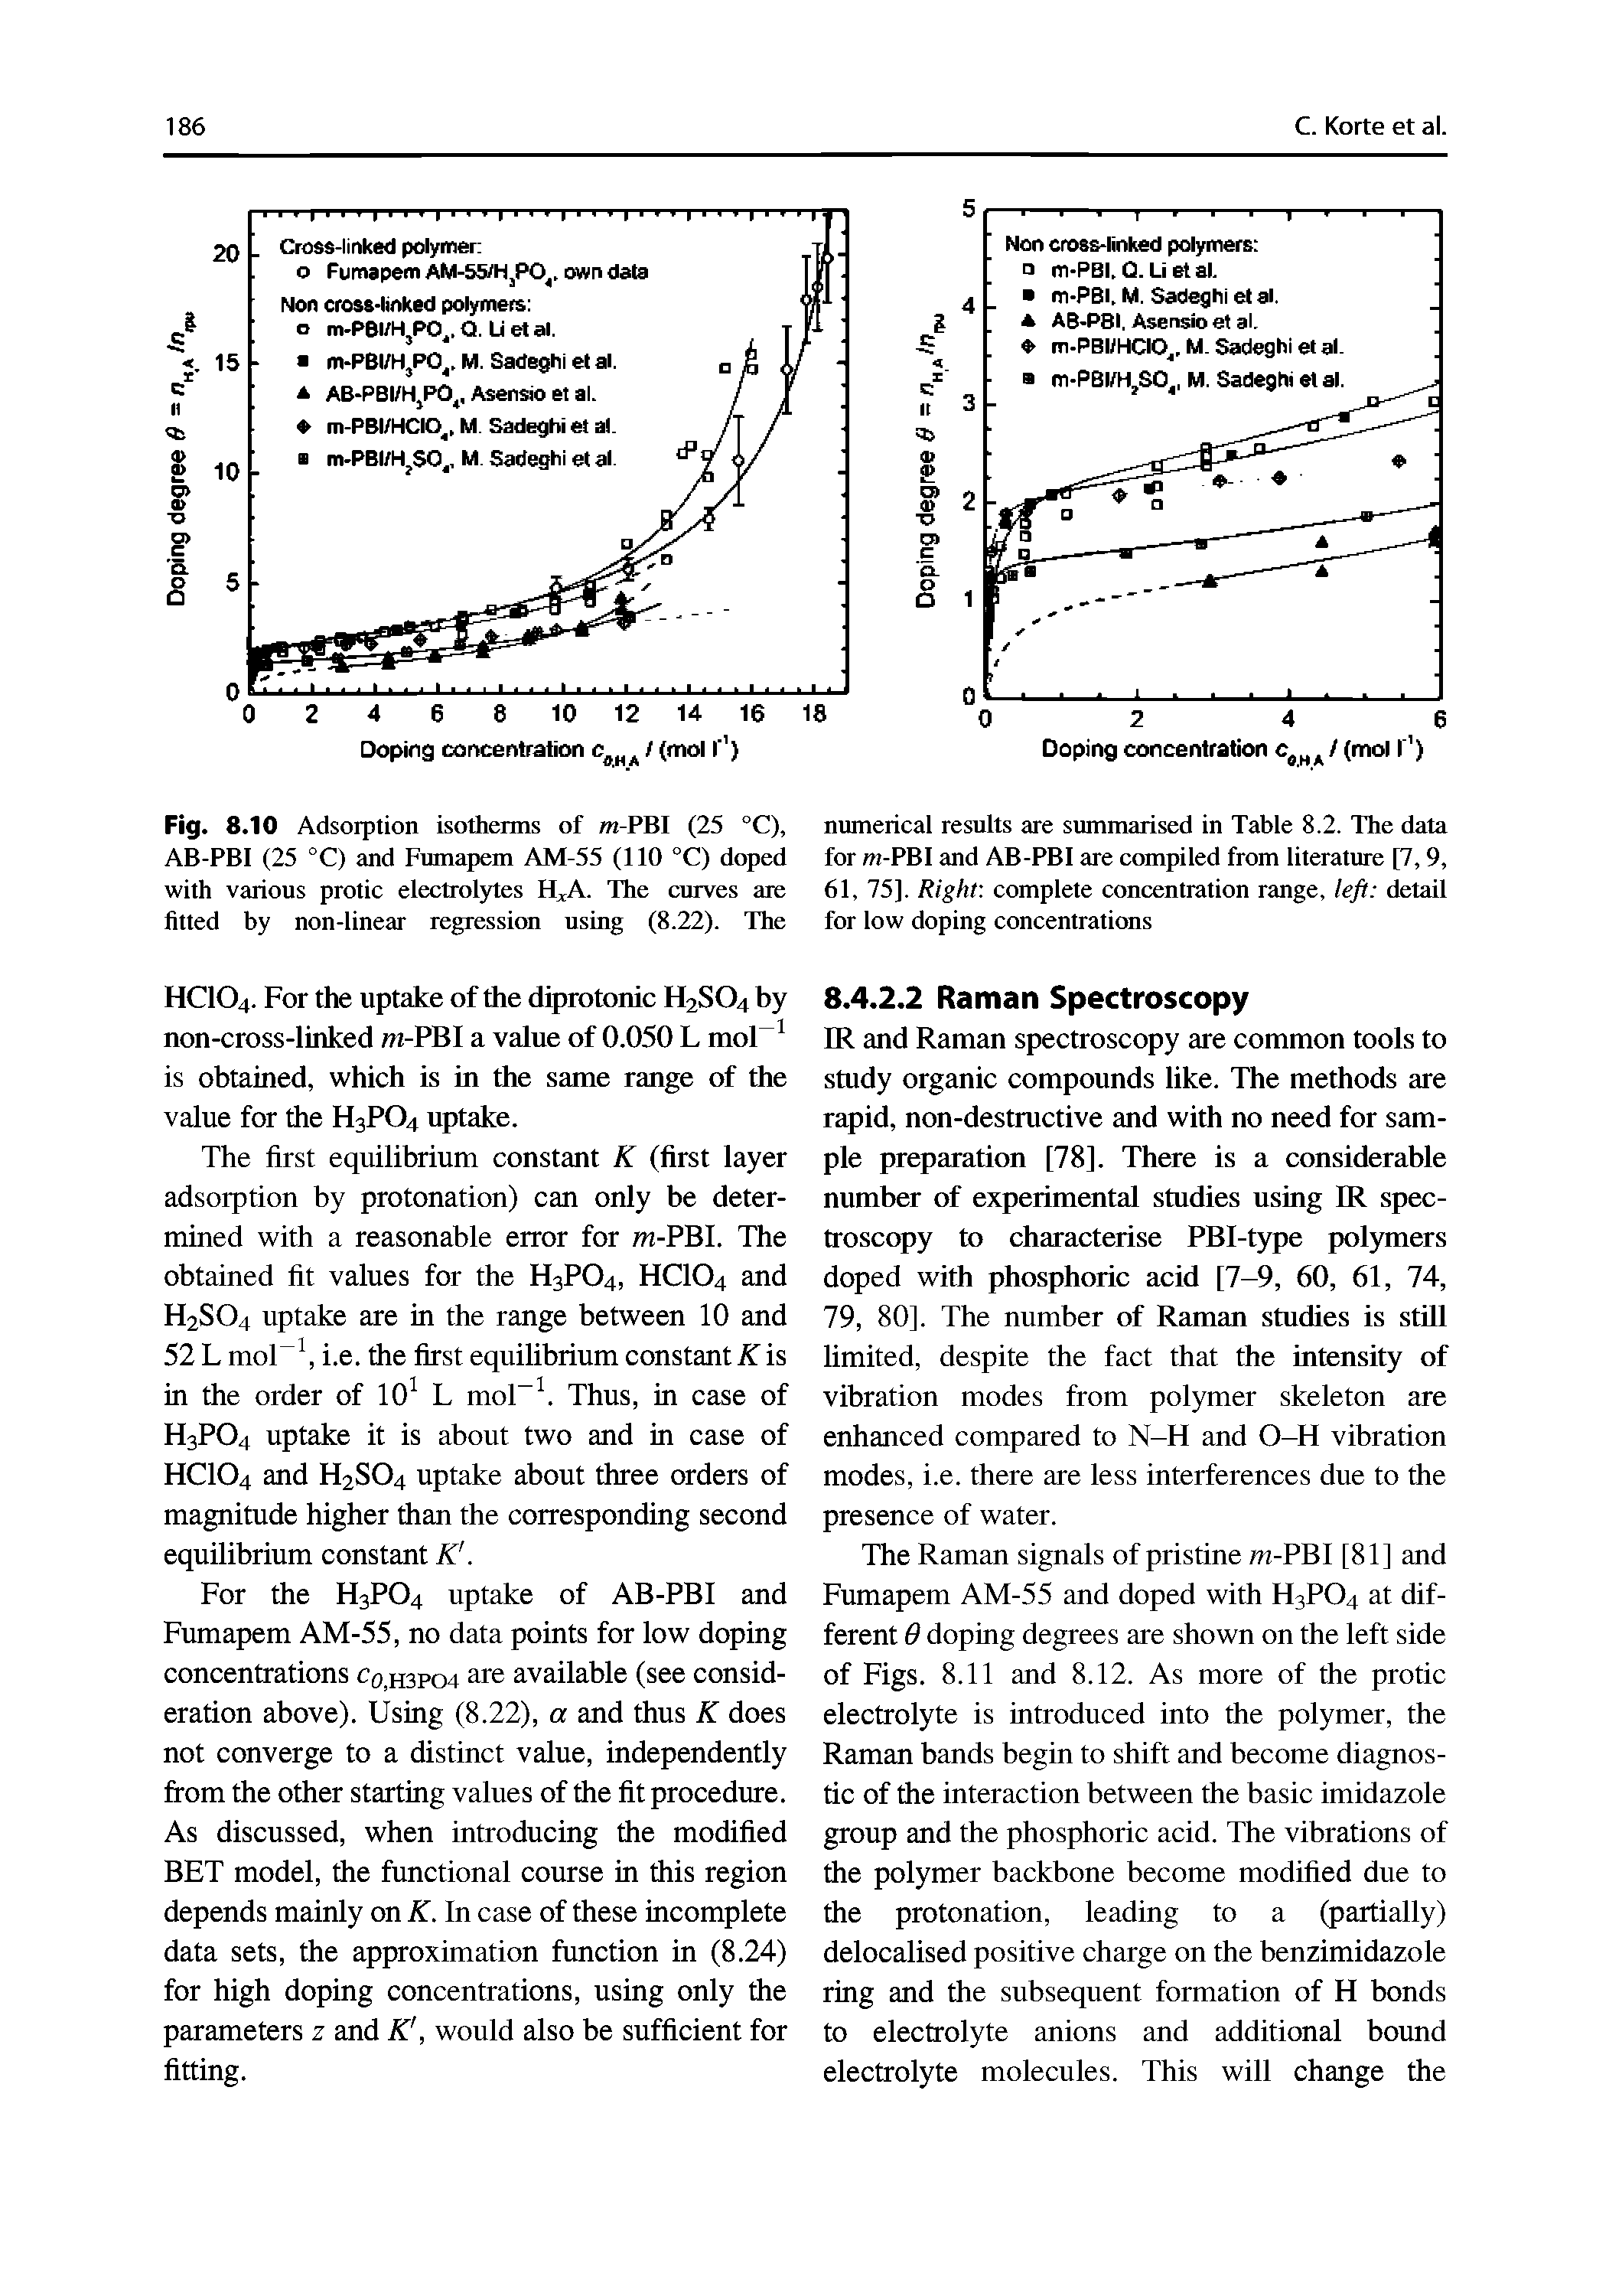 Fig. 8.10 Adsorption isotherms of m-PBI (25 °C), AB-PBI (25 °C) and Fumapem AM-55 (110 °C) doped with various protic electrolytes H A. The curves are fitted by non-linear regression using (8.22). The...